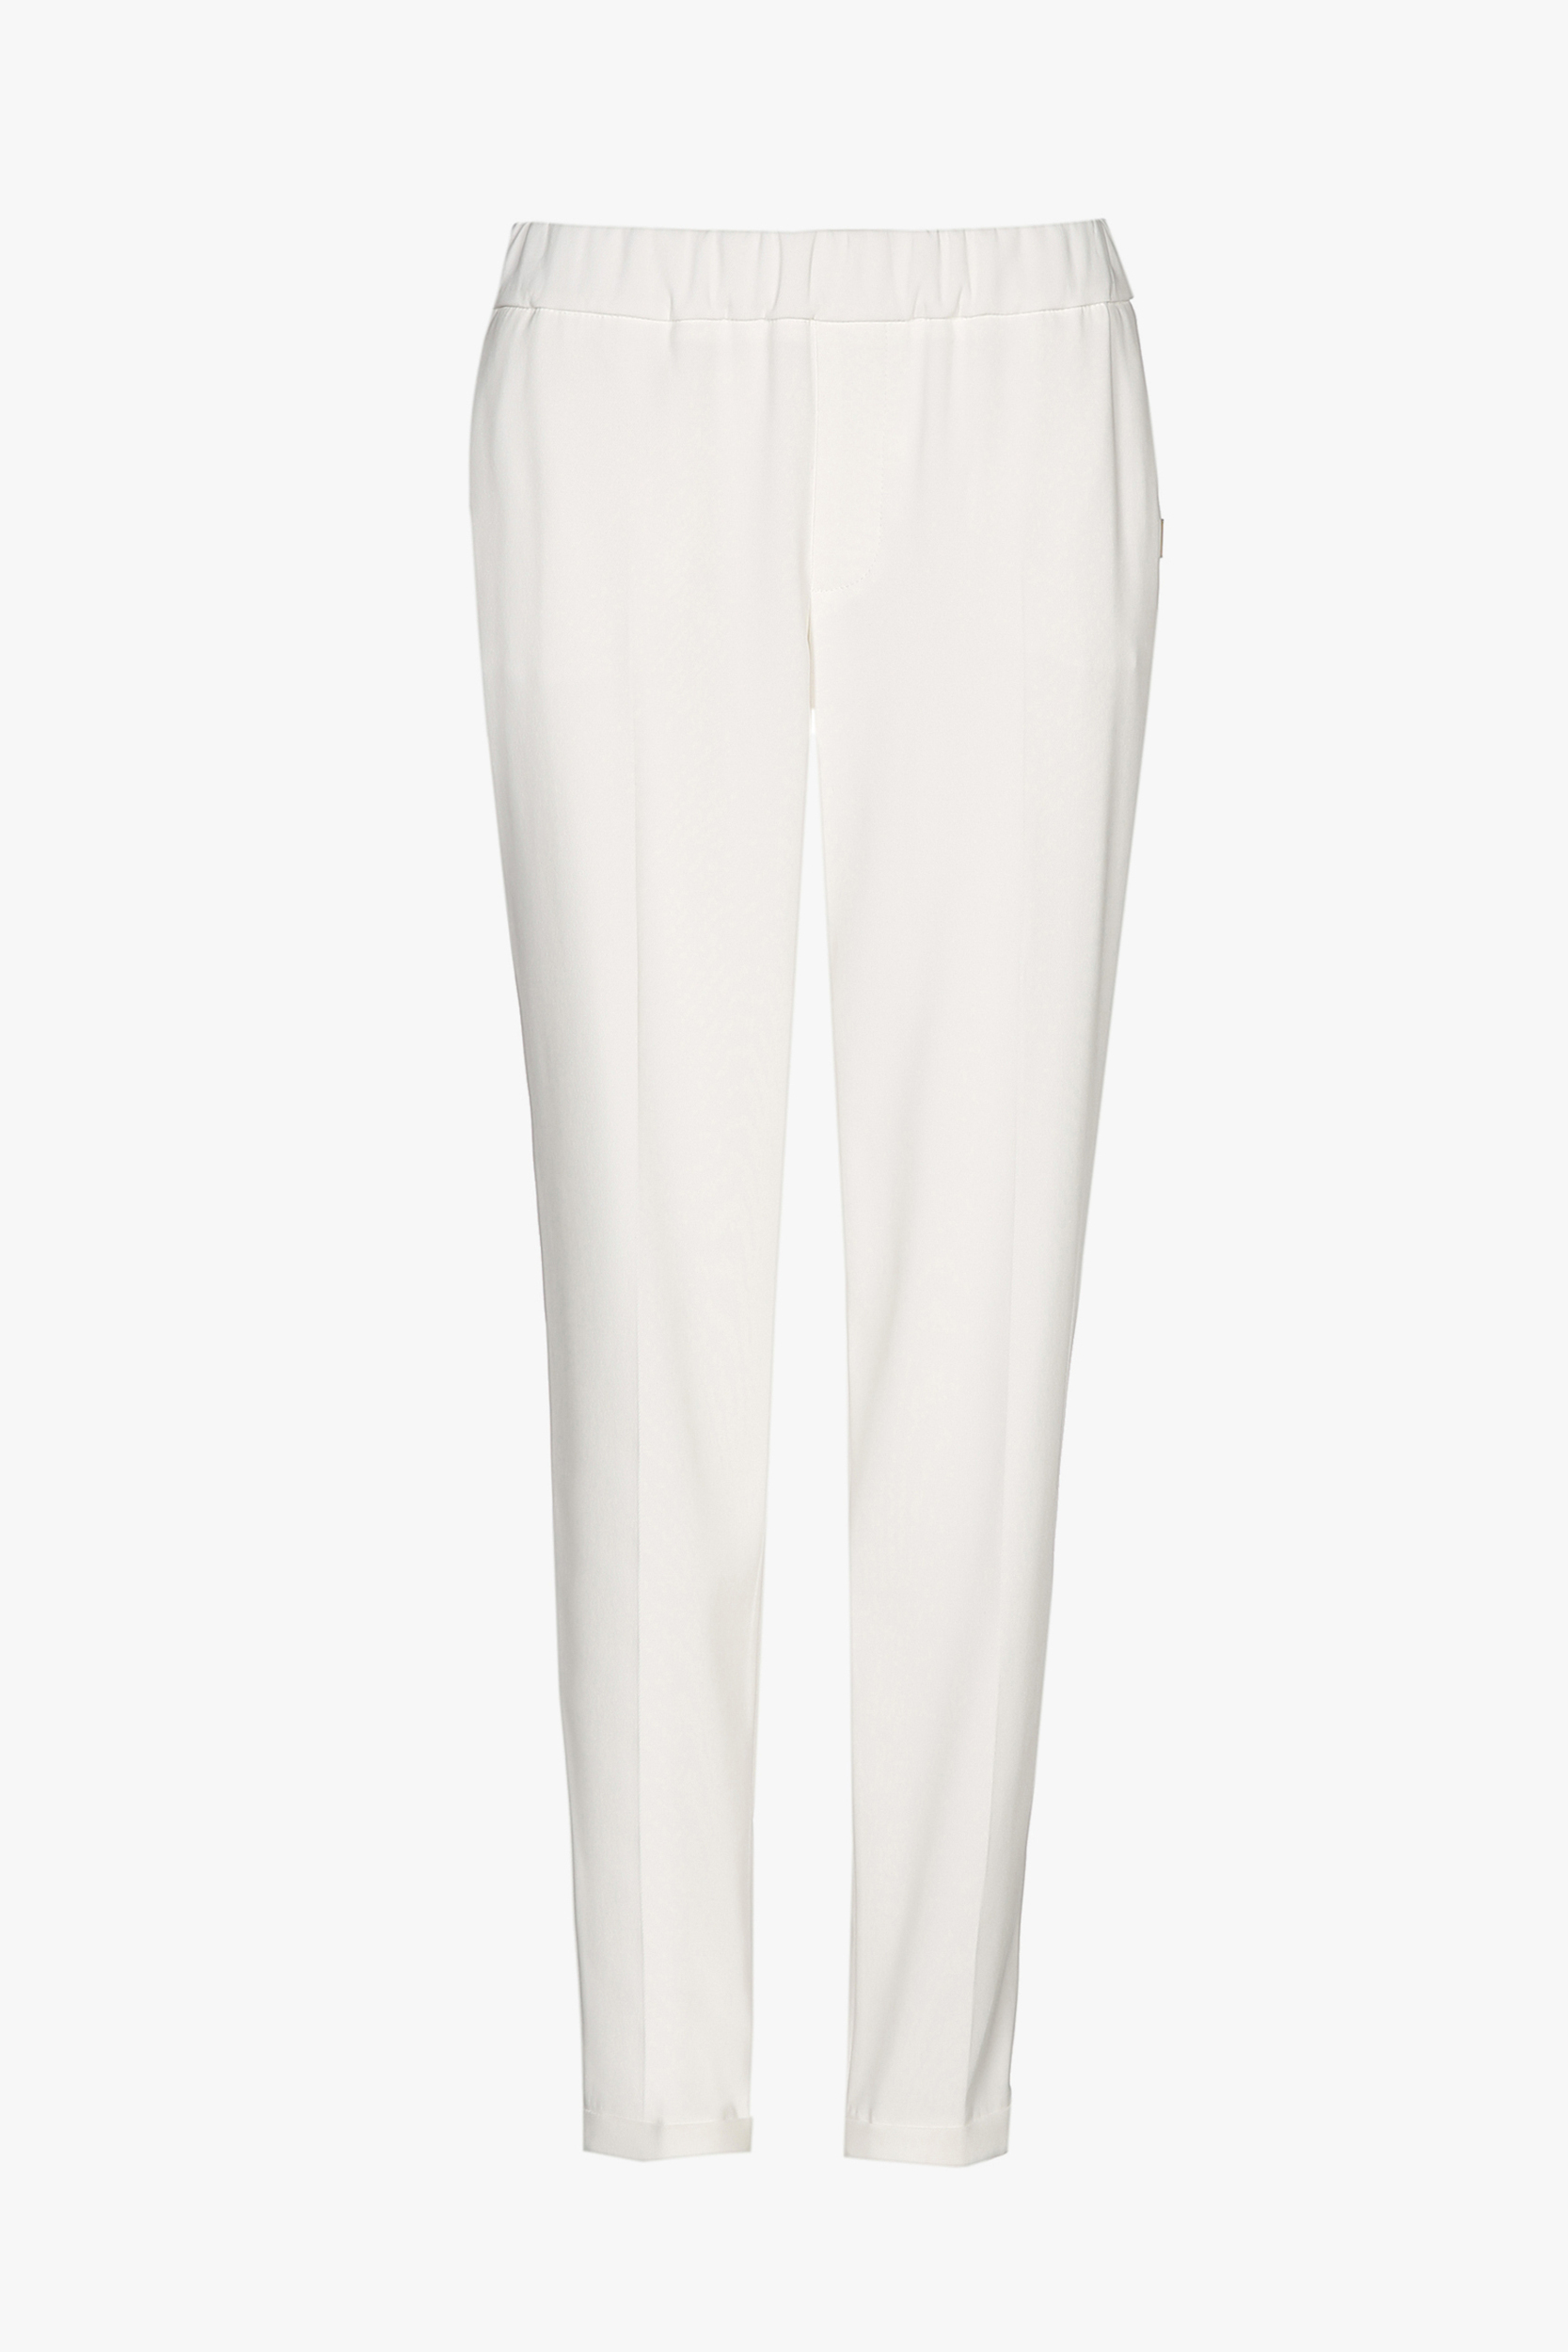 Smart white trousers